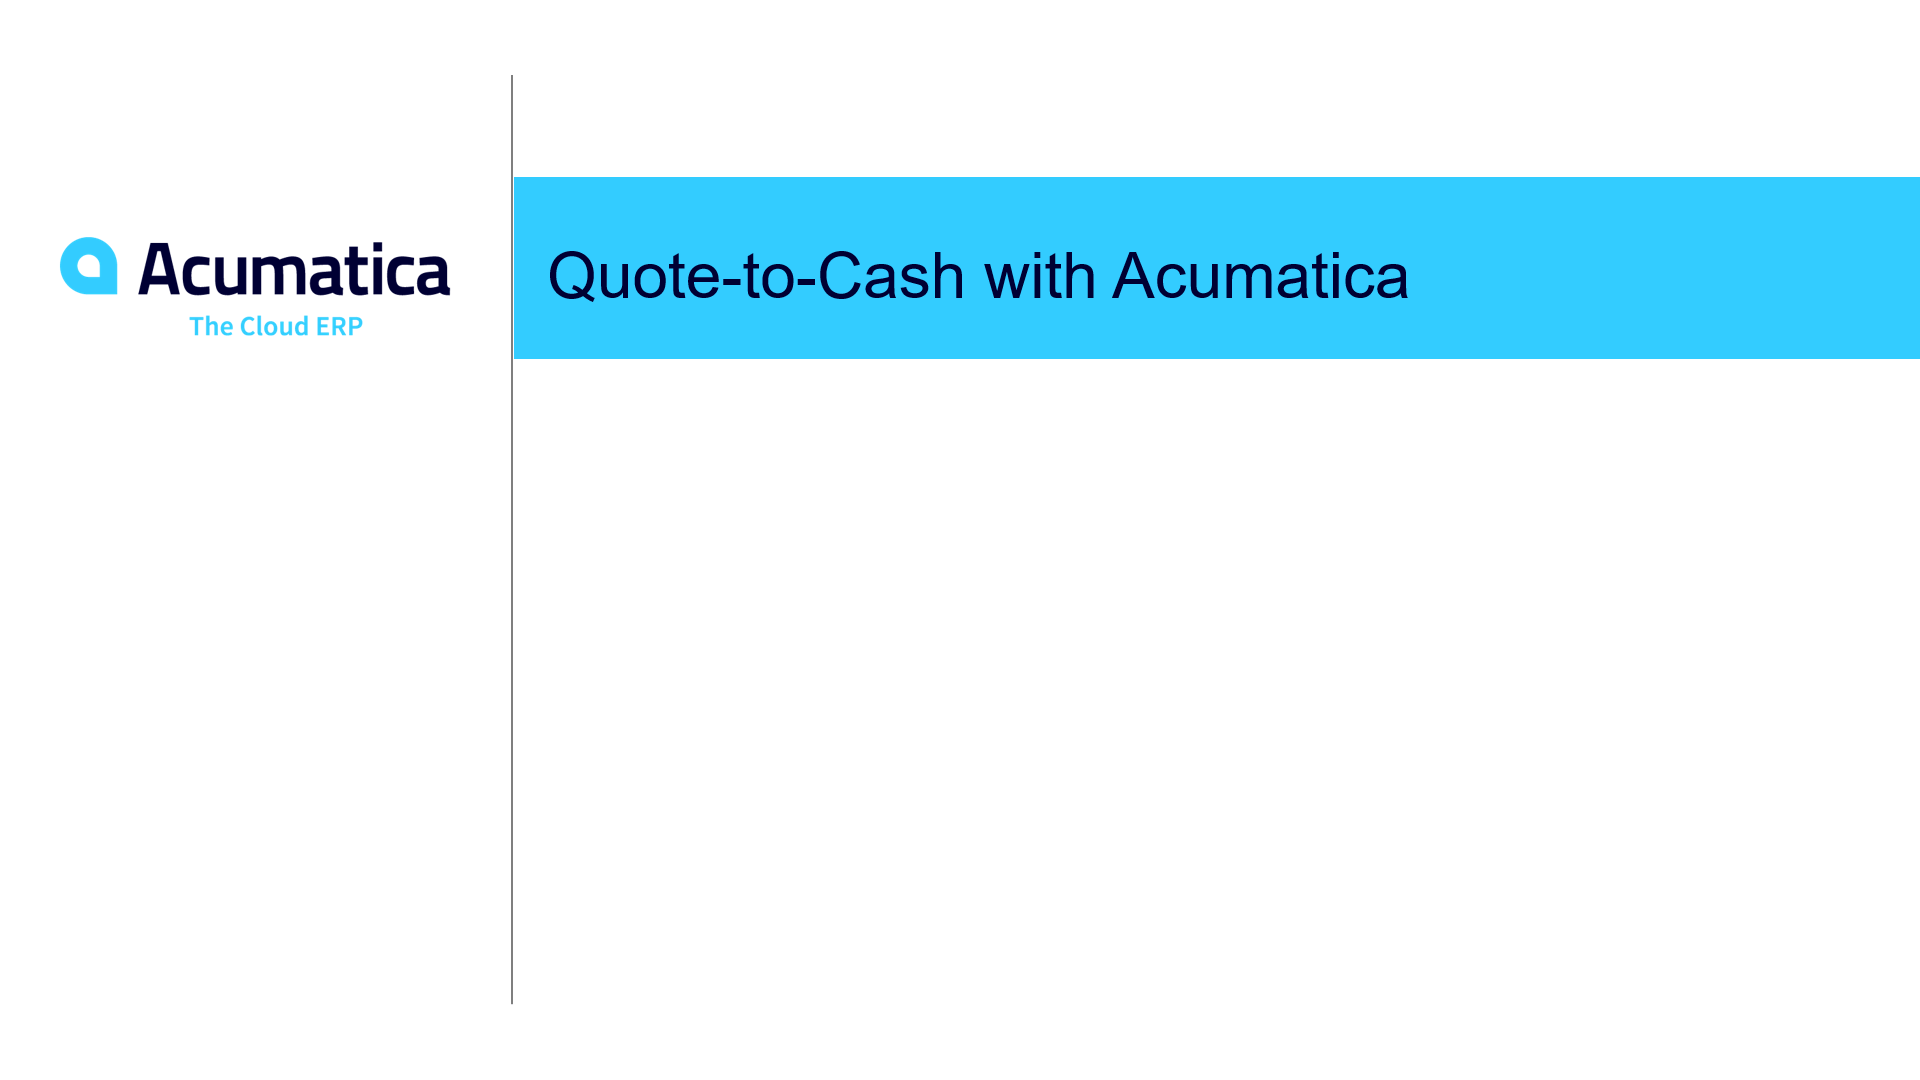 Quote-to-Cash with Acumatica